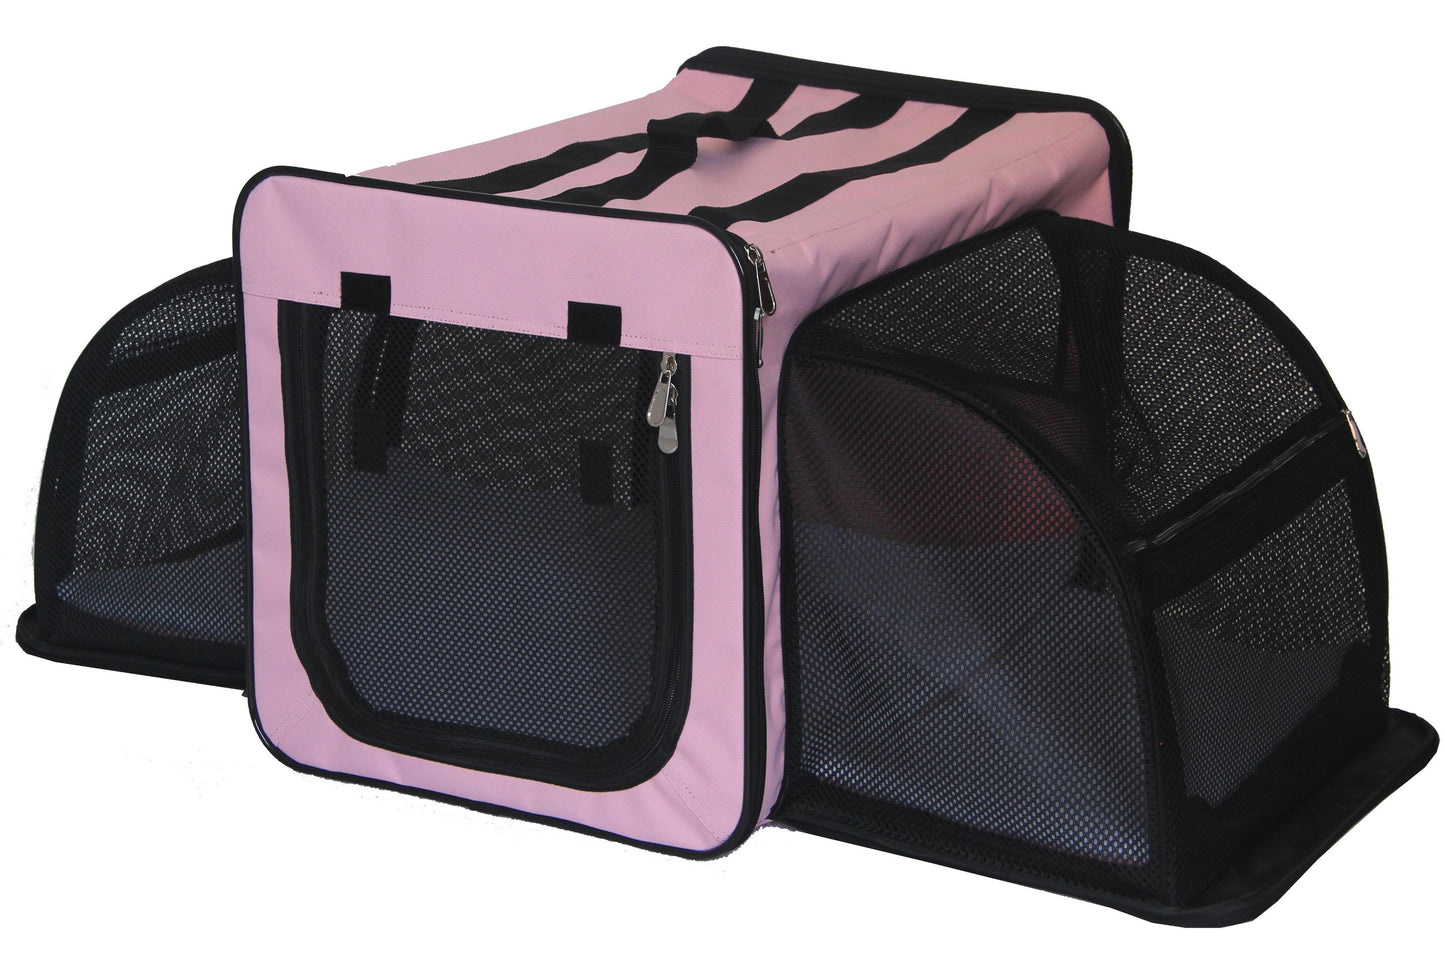 Pet Life Capacious Dual-expandable Wire Folding Lightweight Collapsible Travel Pet Dog Crate - Pink X-large